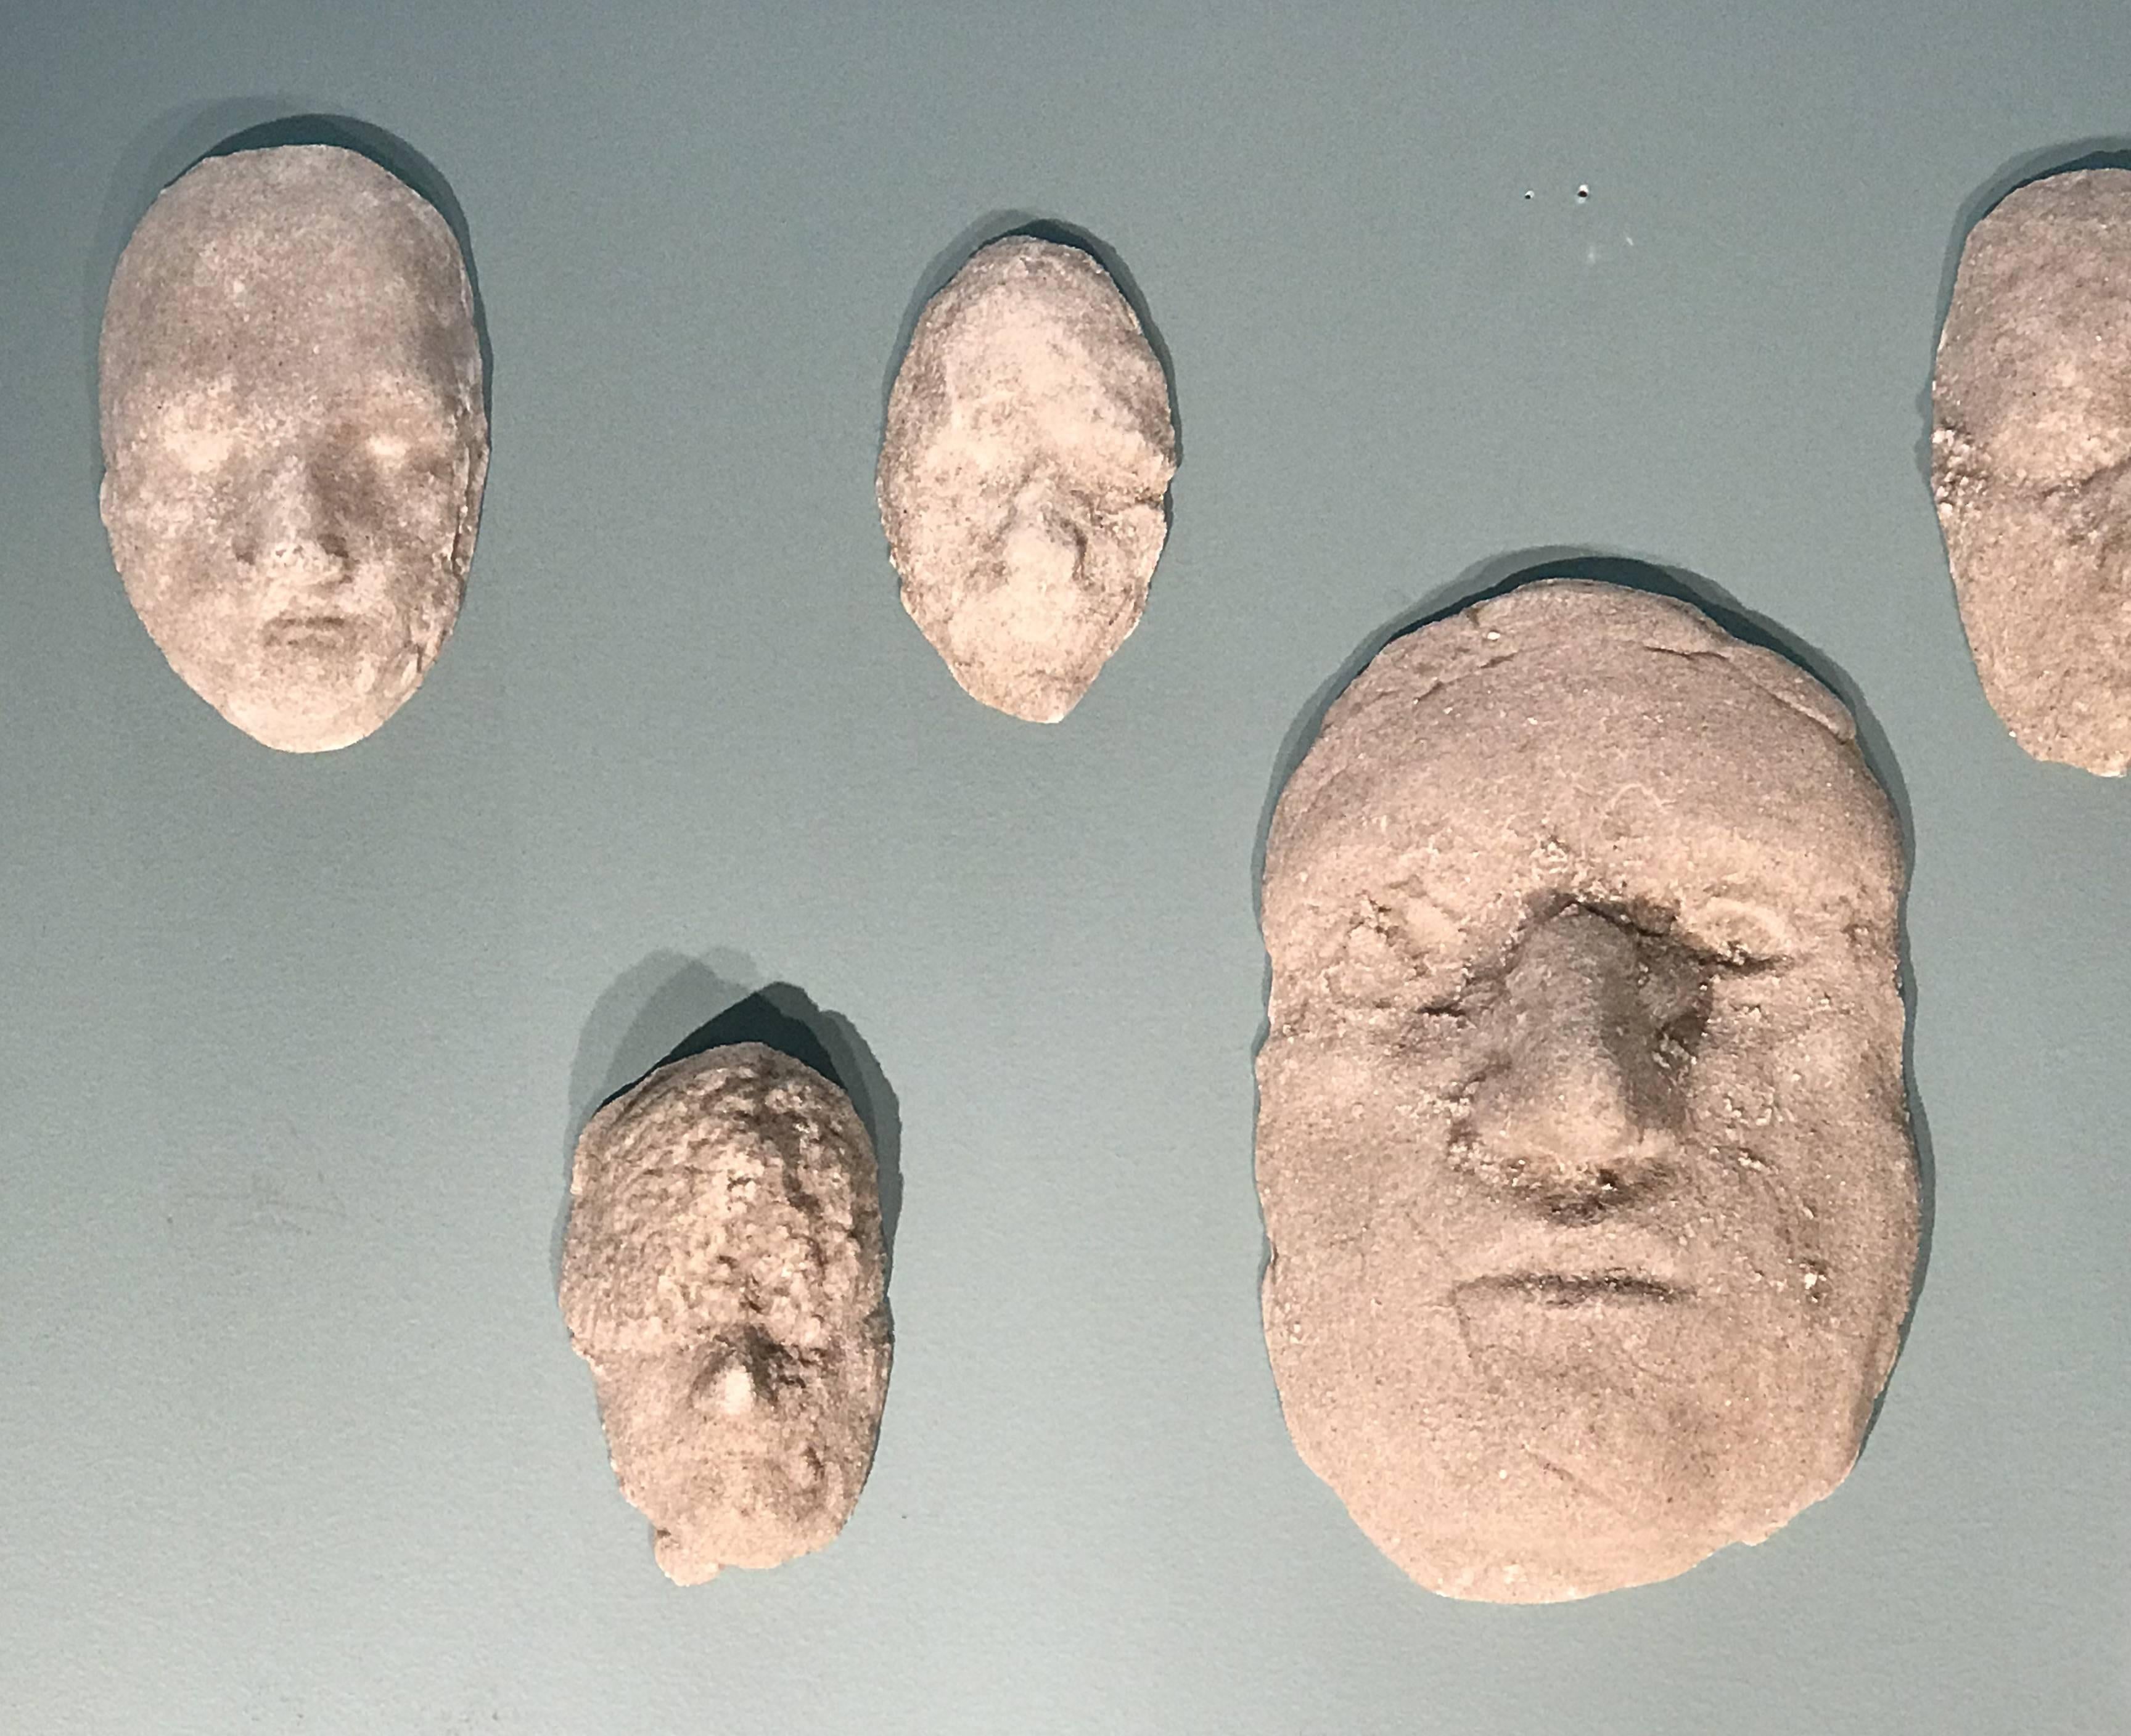 A fine set of 12 plaster relief sculptures titled “Heads” by American sculptor and artist Neal Beckerman (20th / 21st century). Beckerman was born in 1949 in Newton, Massachusetts. He attended the School of the Museum of Fine Arts, Boston,